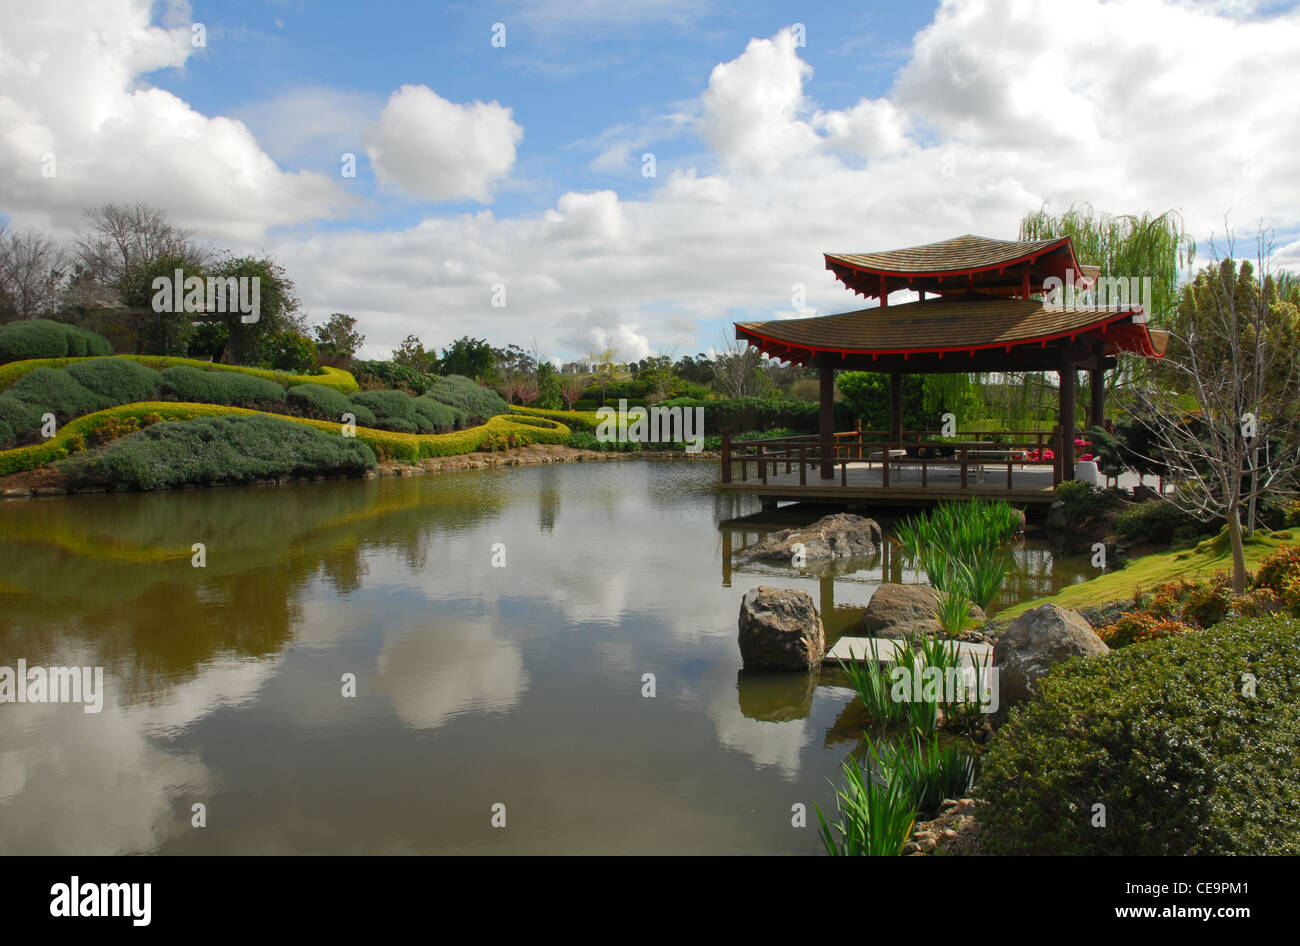 A scene from a Japanese garden, New South Wales, Australia Stock Photo